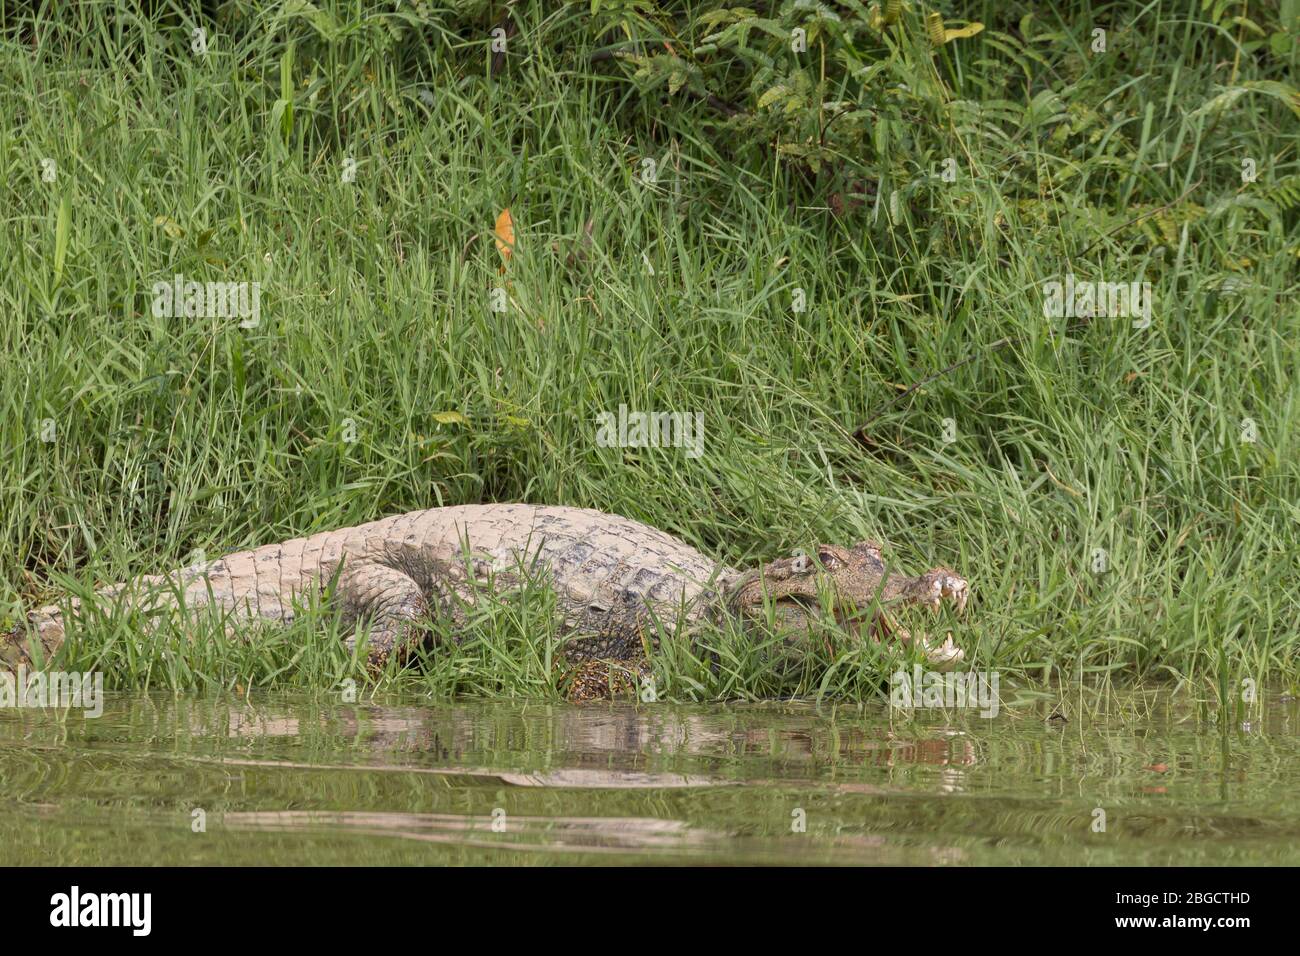 Spectacled caiman (Caiman crocodilus) submerging from a river bank. Amazon rainforest, Brazil. Stock Photo